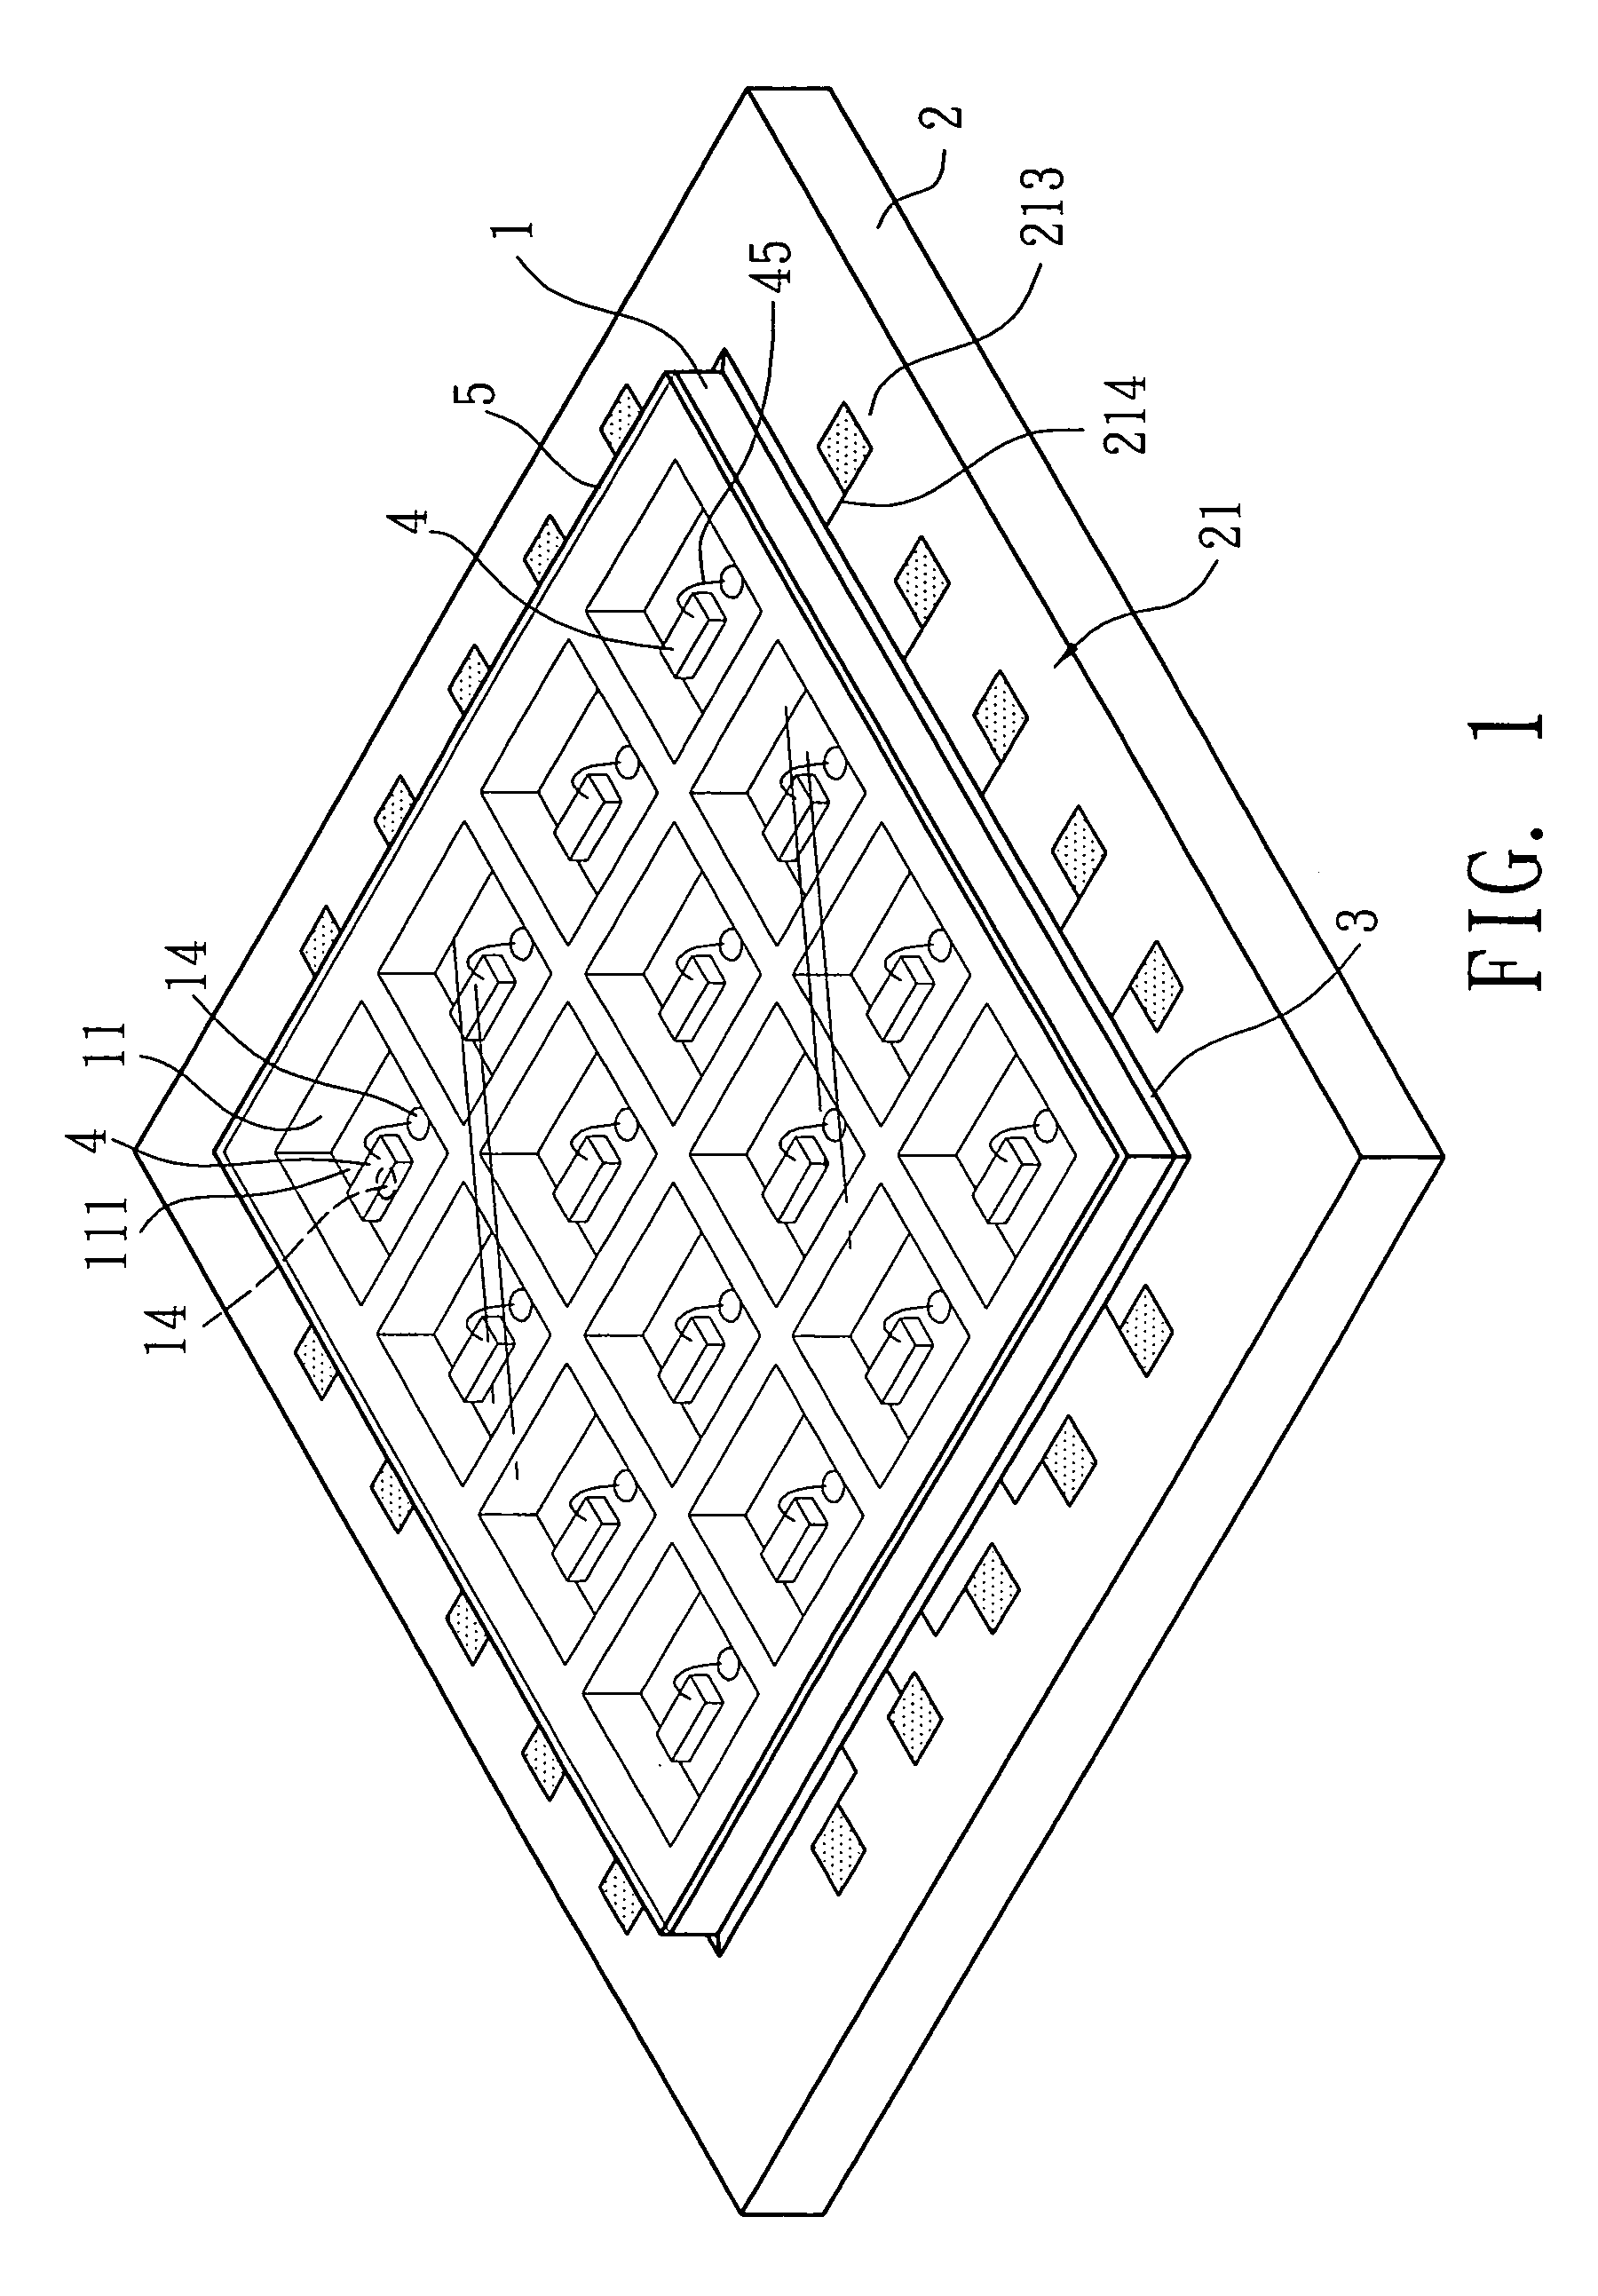 Array-type modularized light-emitting diode structure and a method for packaging the structure